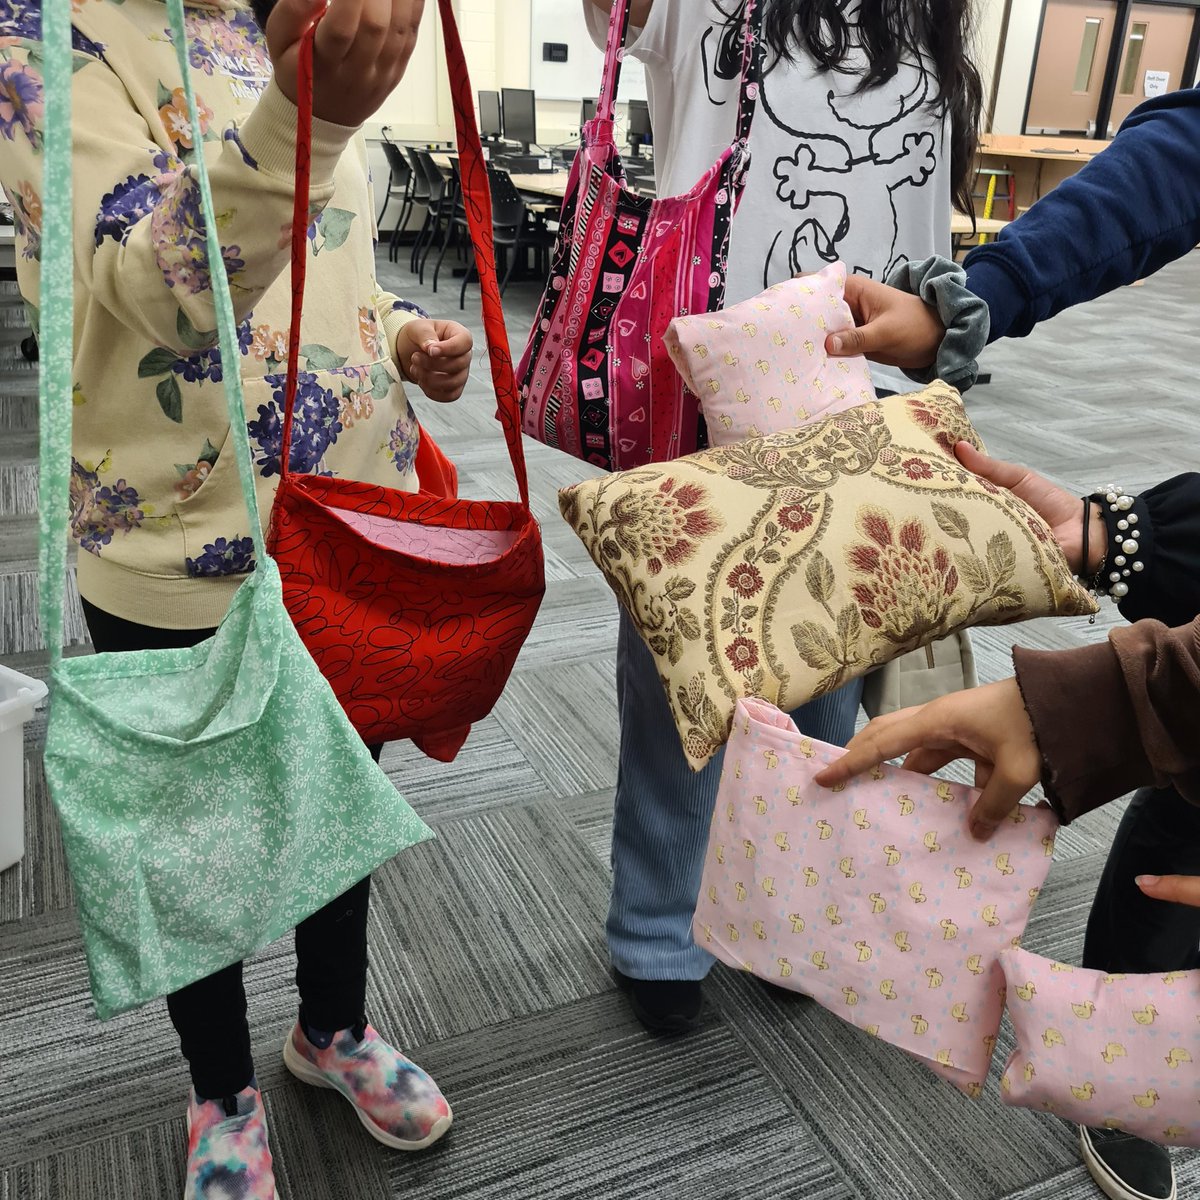 Students @DarcelSeniorPS were creative with their sewing ideas and  learning from our amazing community volunteers. Thanks for your help. #makerspace #PeelEML